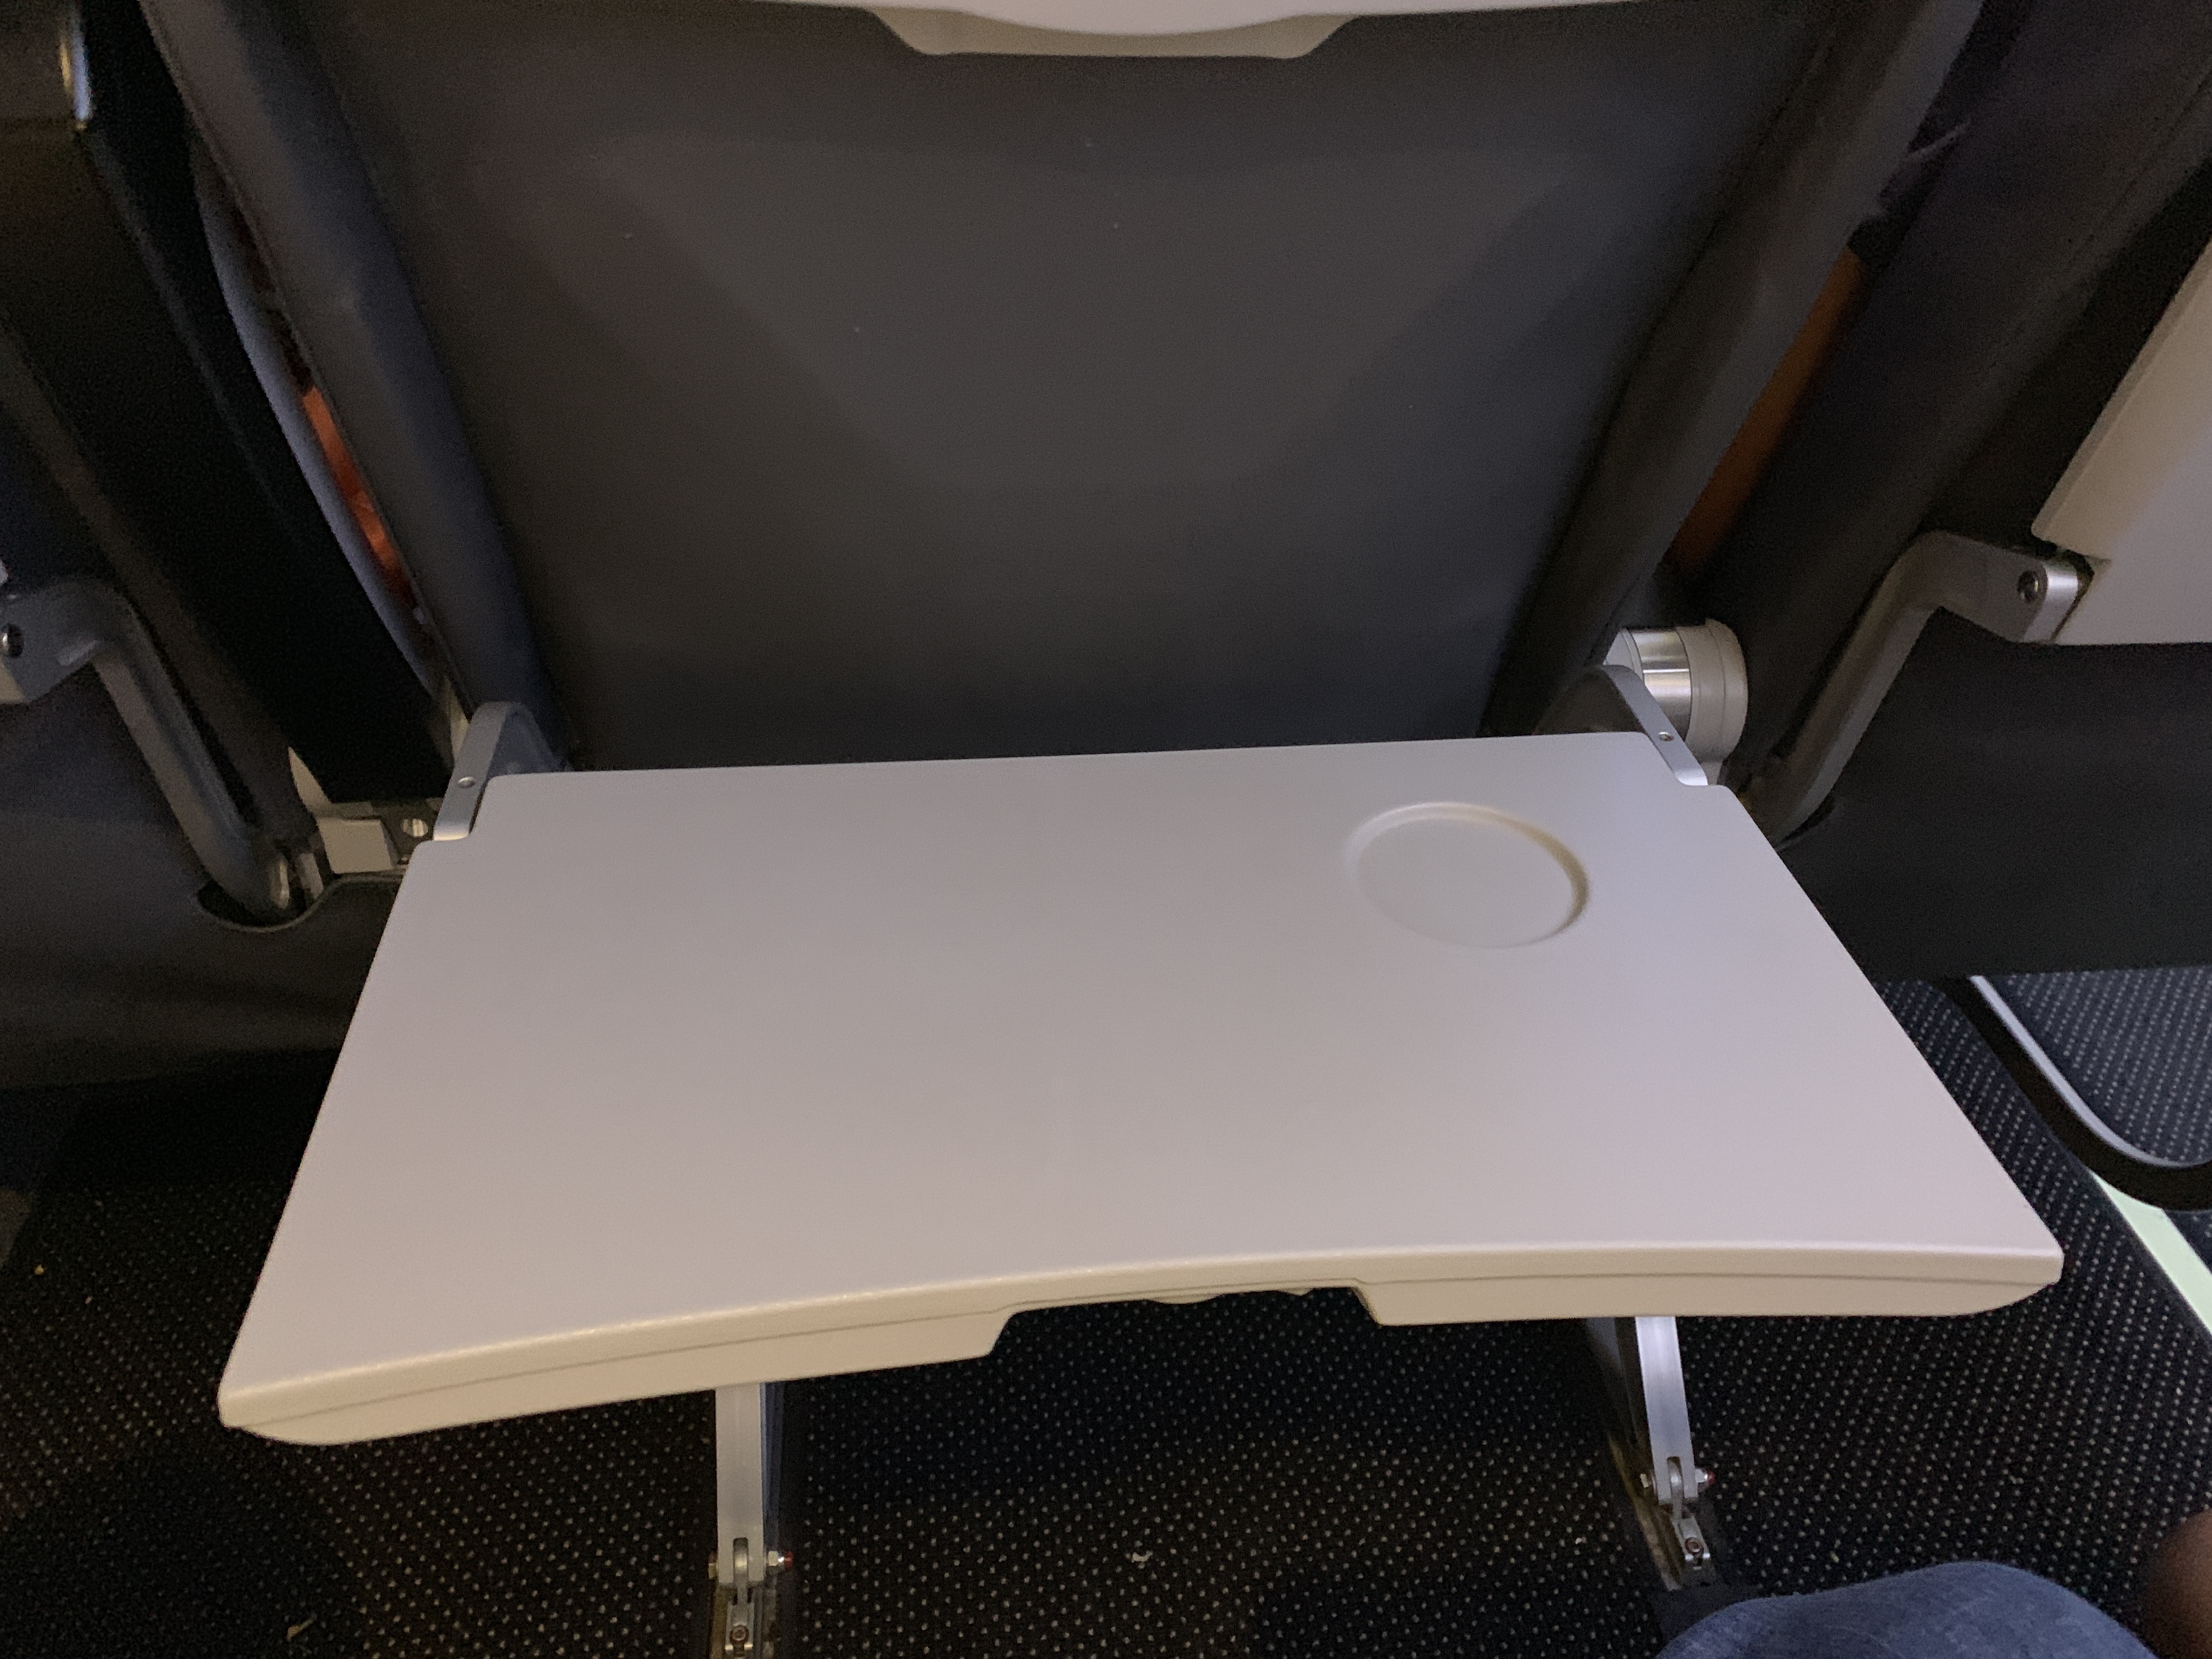 a white rectangular object in a seat